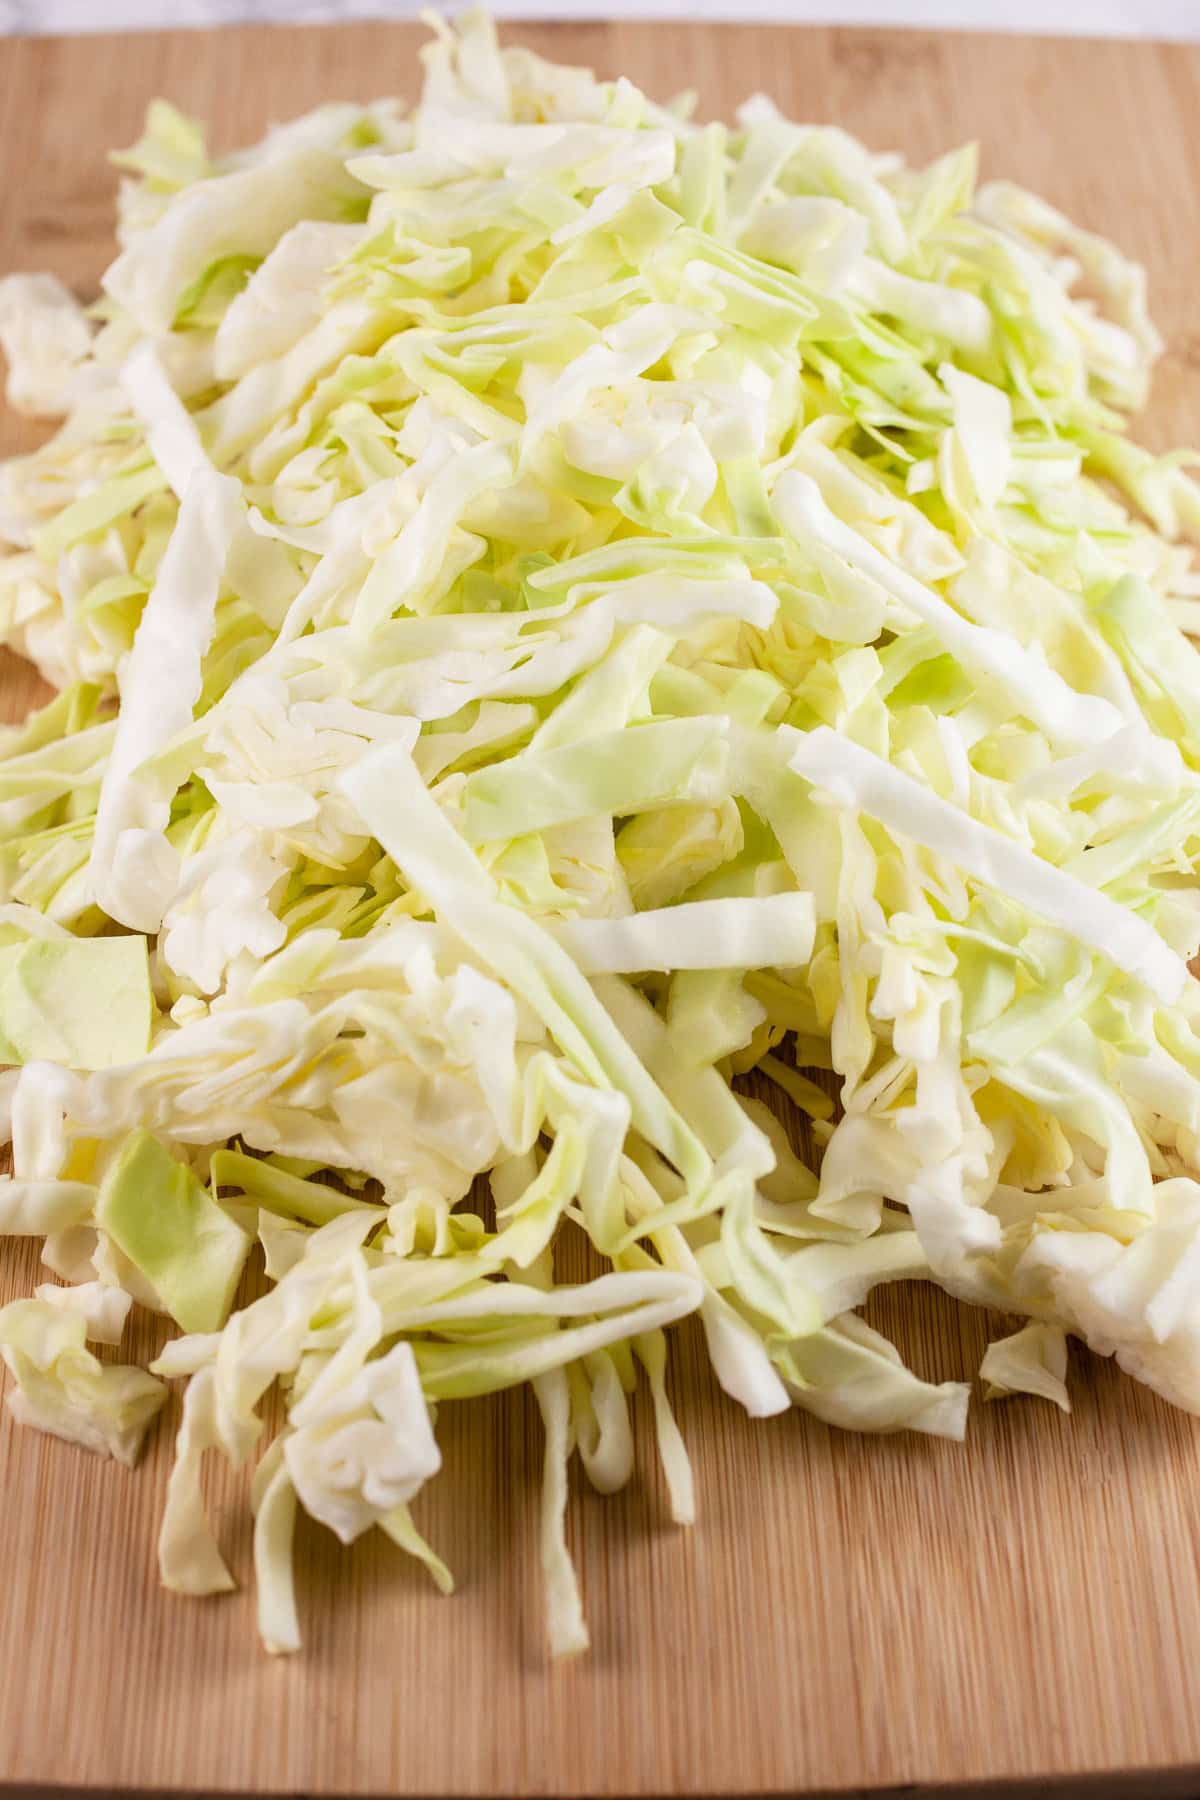 Shredded cabbage leaves on wooden cutting board.